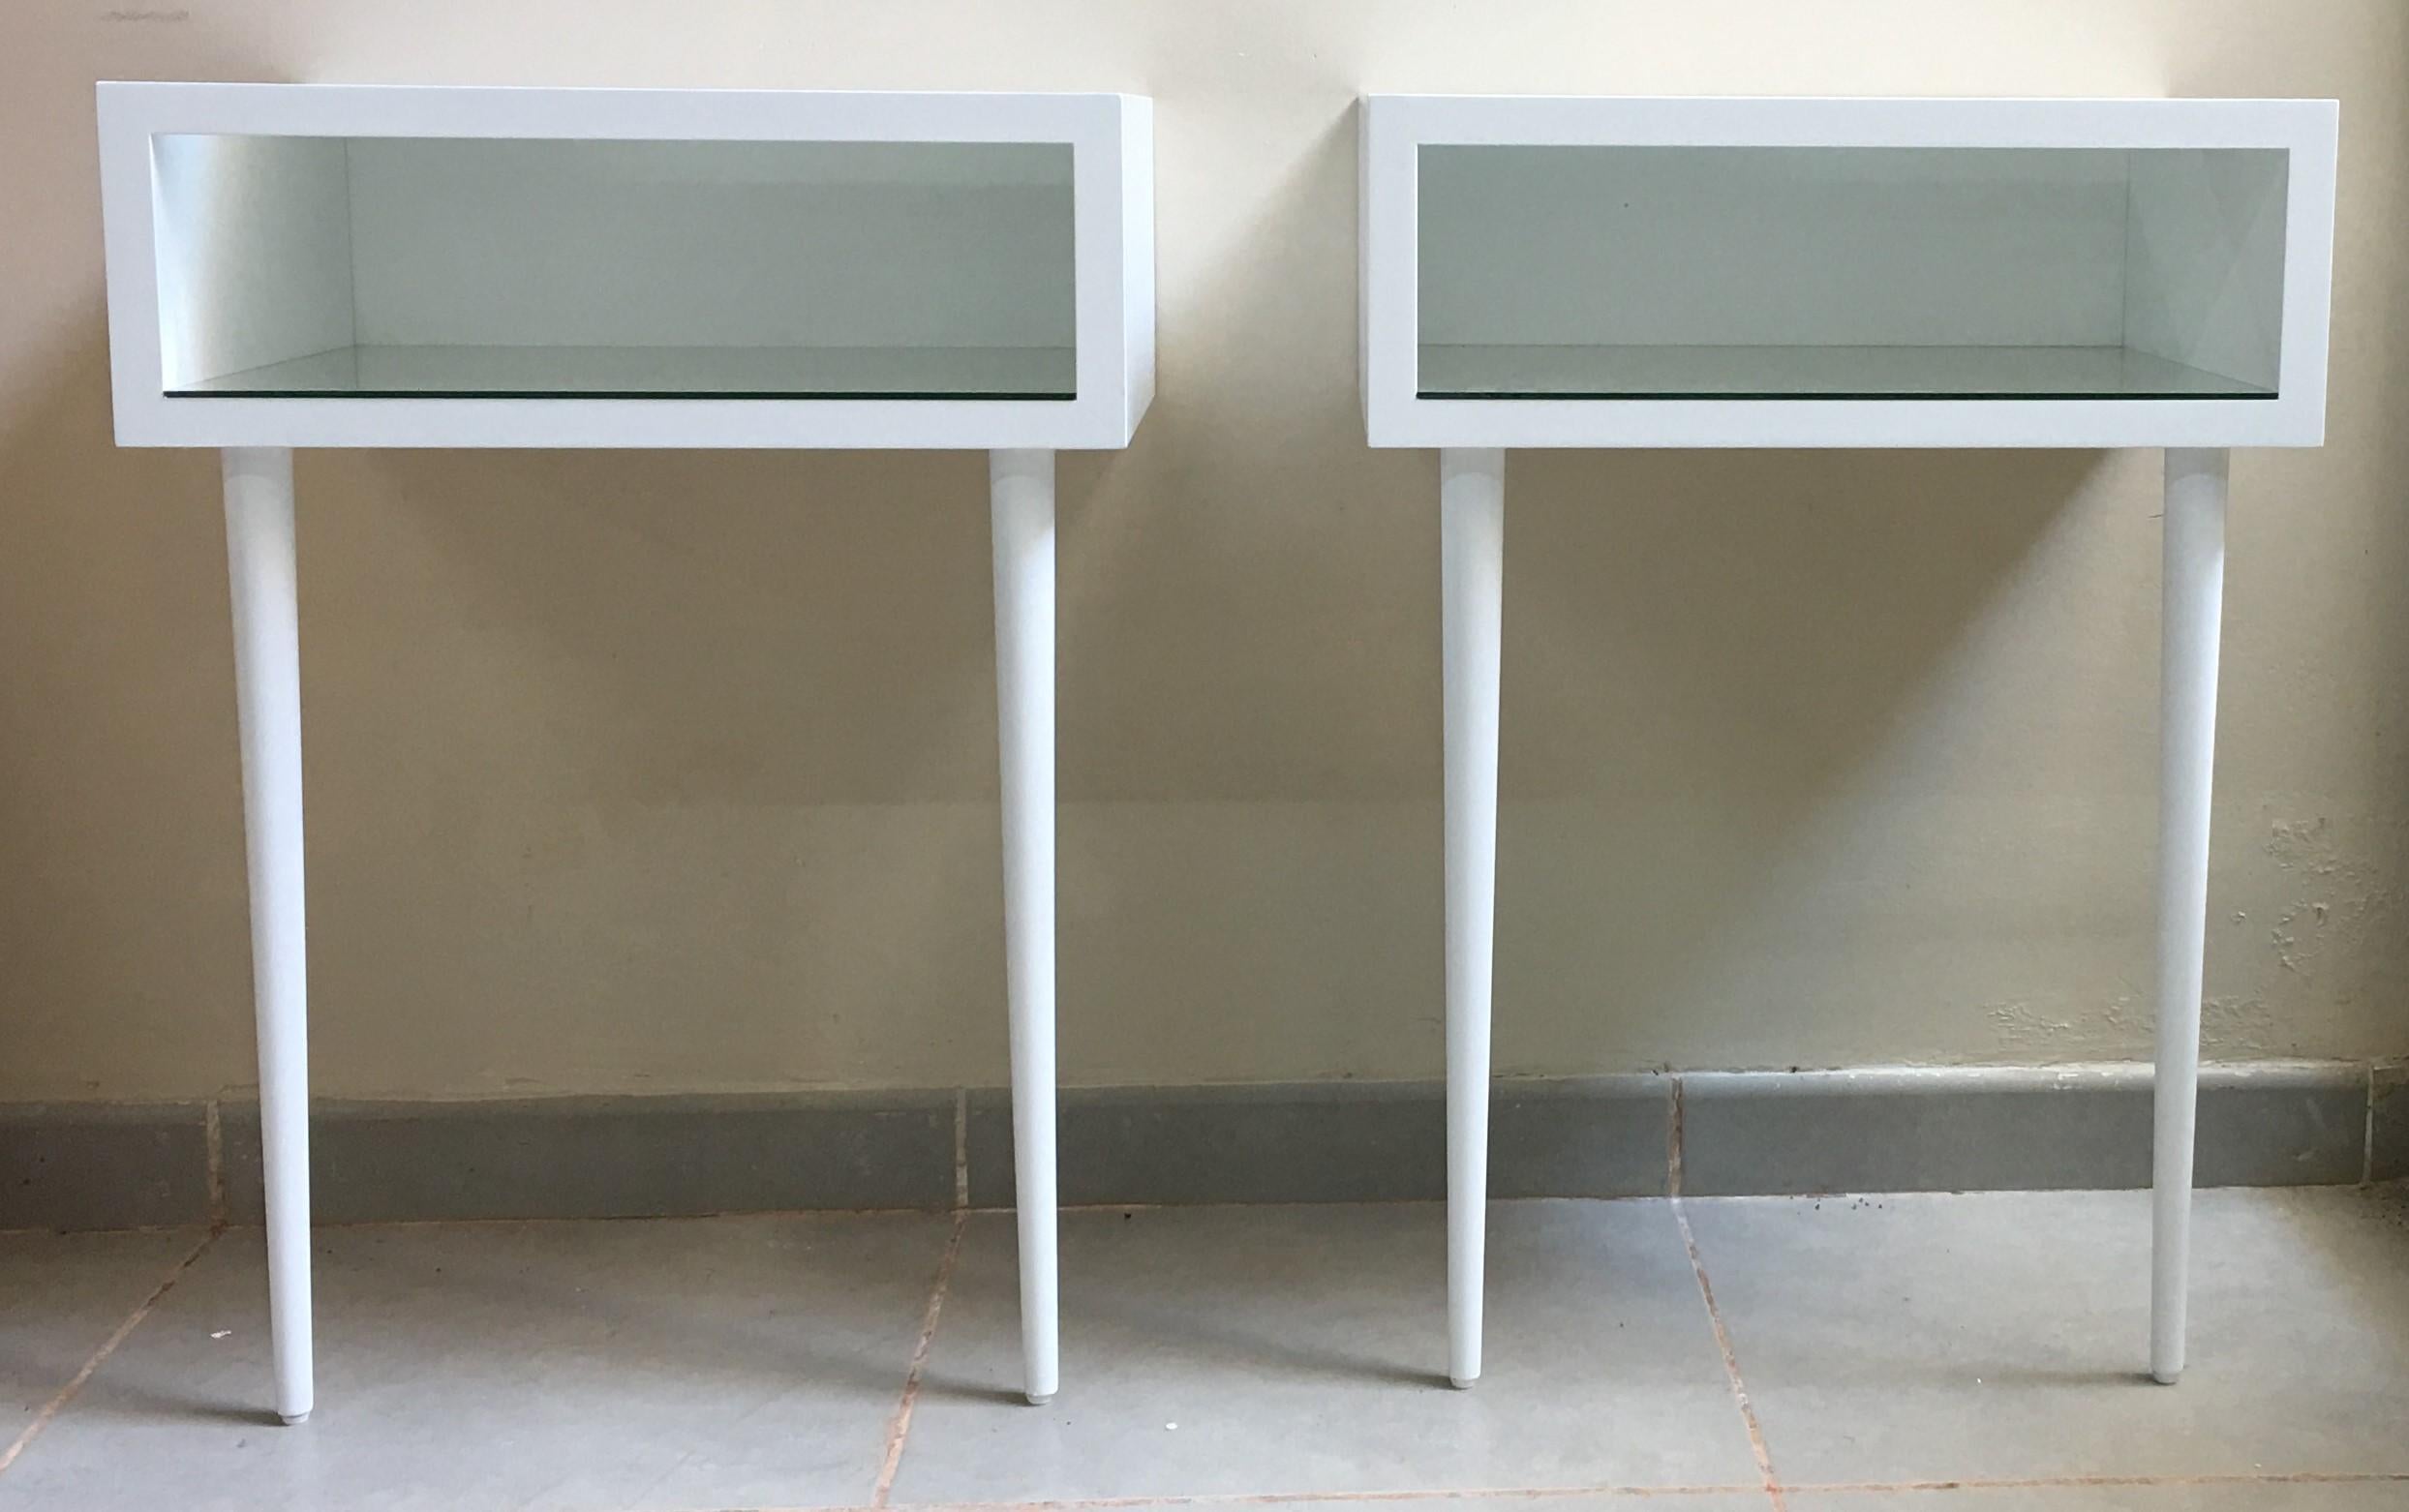 20th century Danish midcentury white modern style nightstands, a pair.
You must to screw to the wall